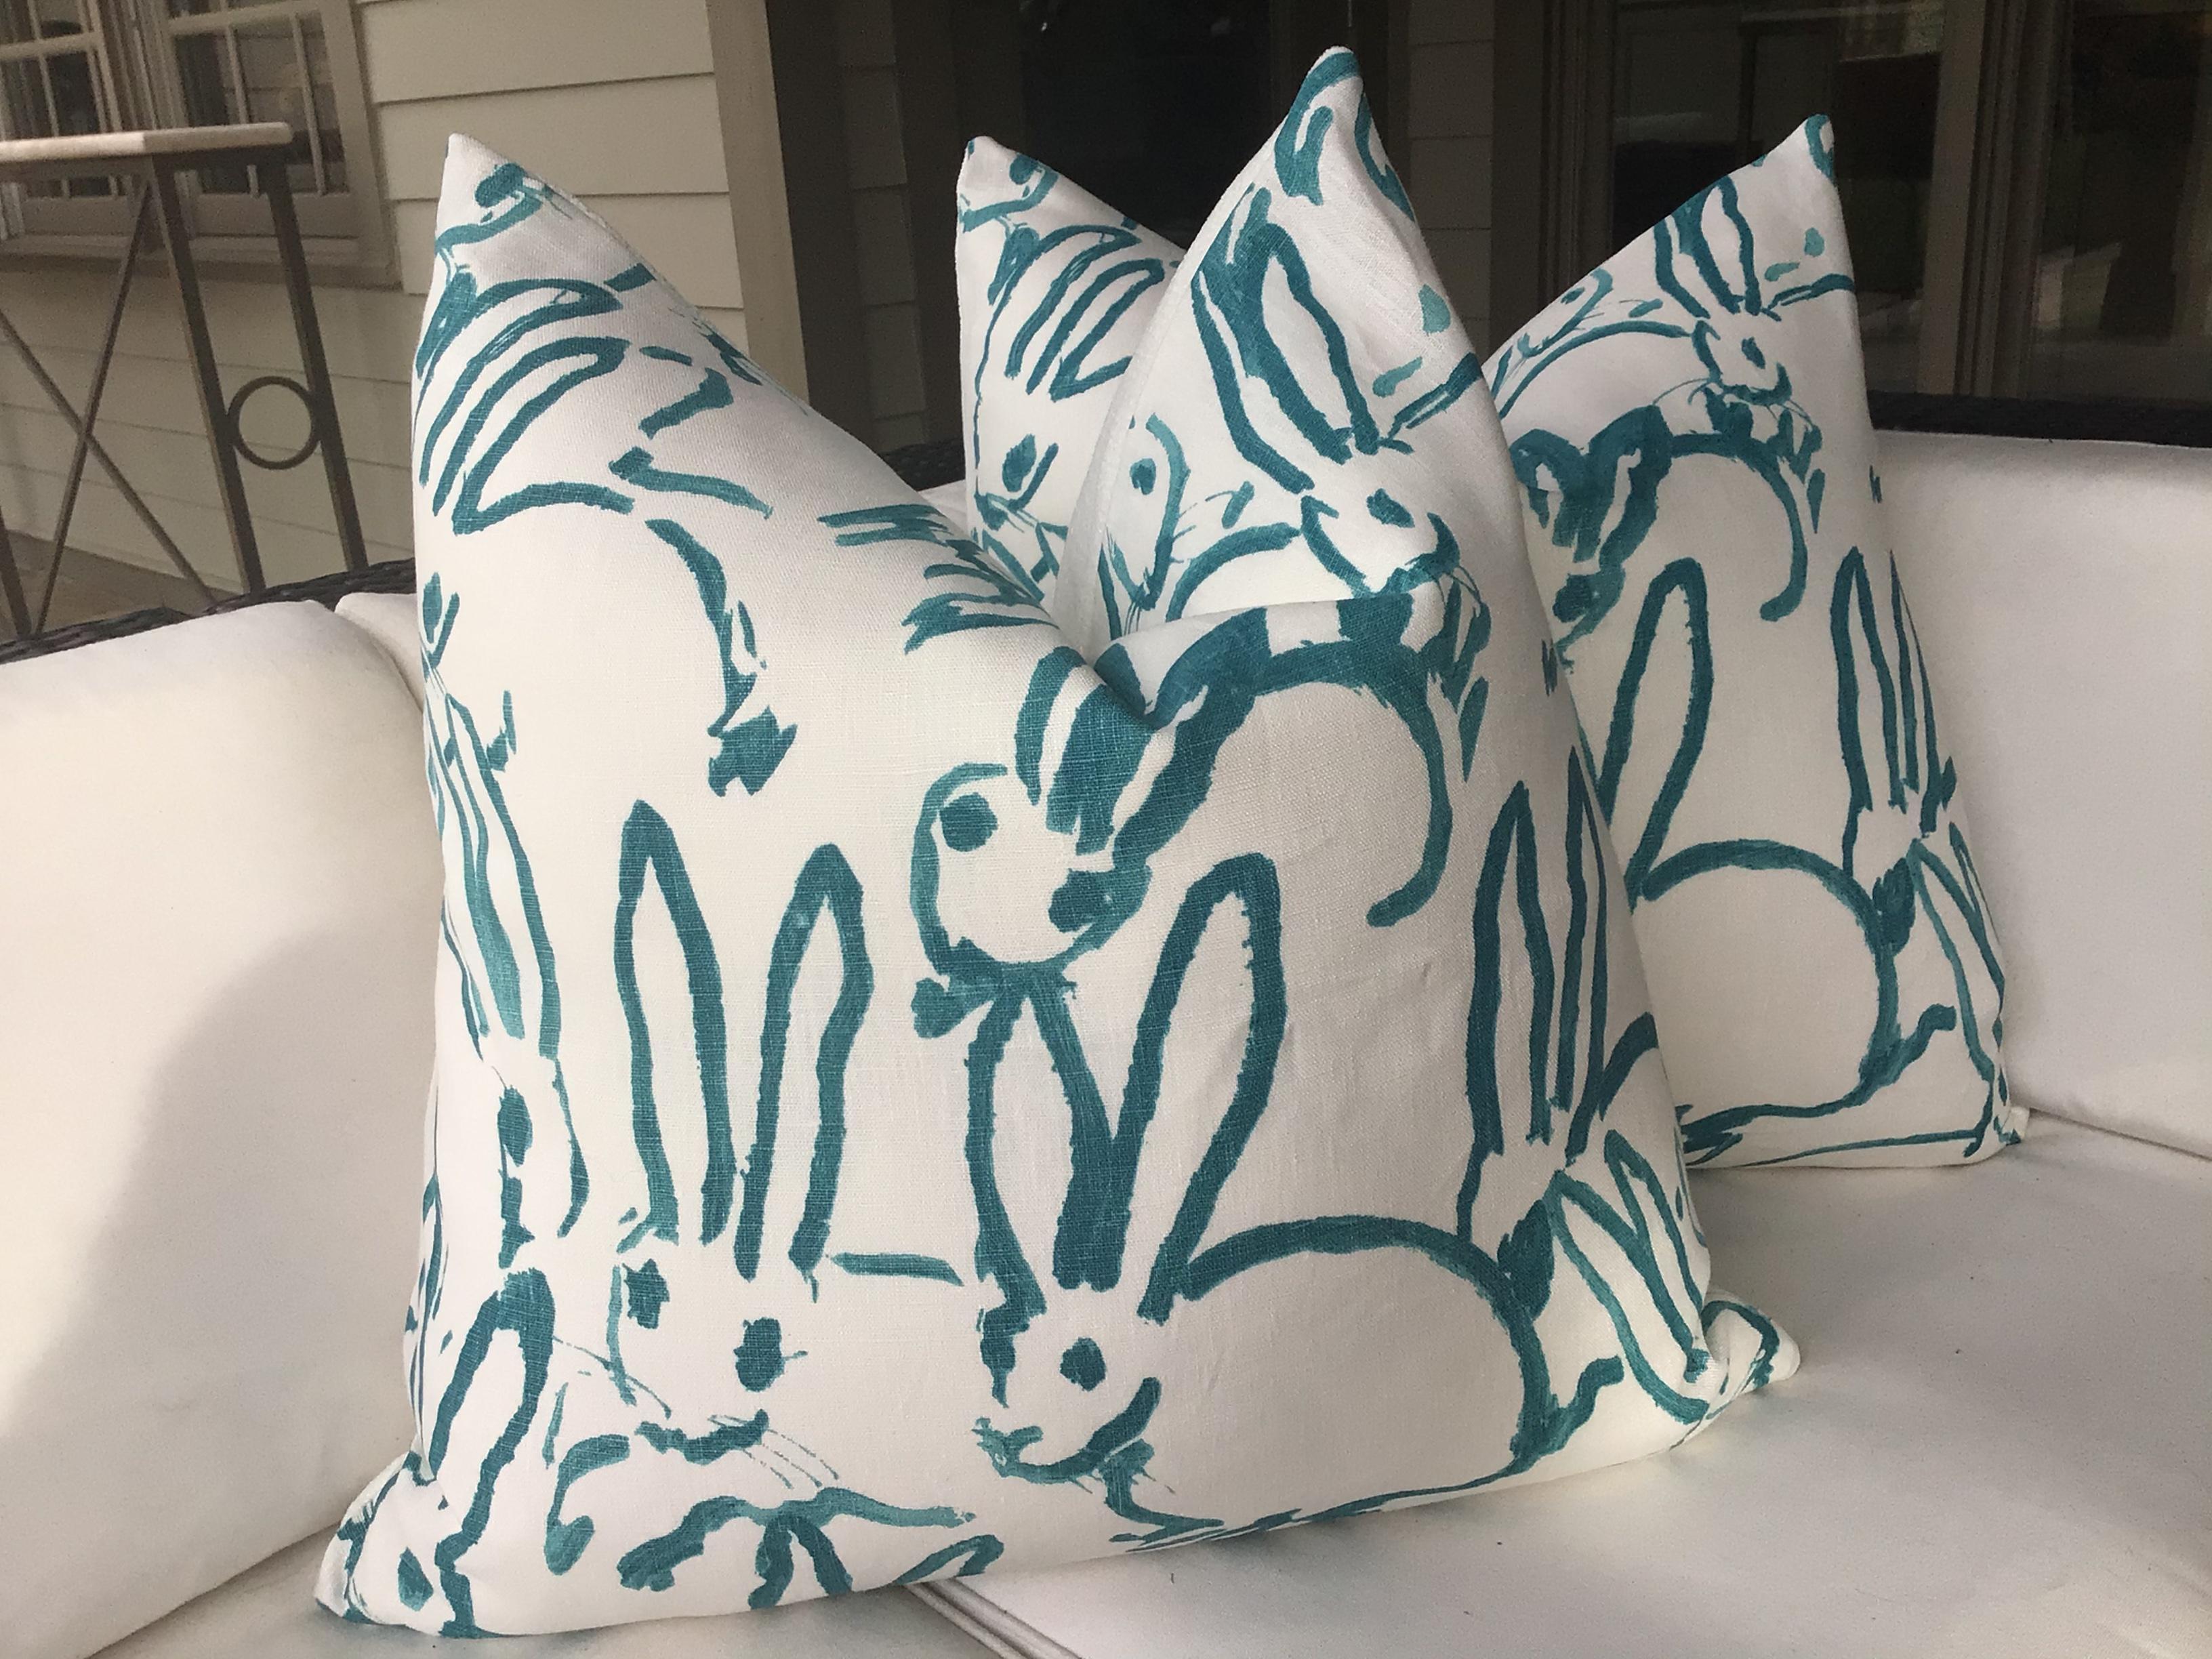 American Hunt Slonen “Bunny Hutch” in Aqua 22” Down Filled Pillows - a Pair For Sale